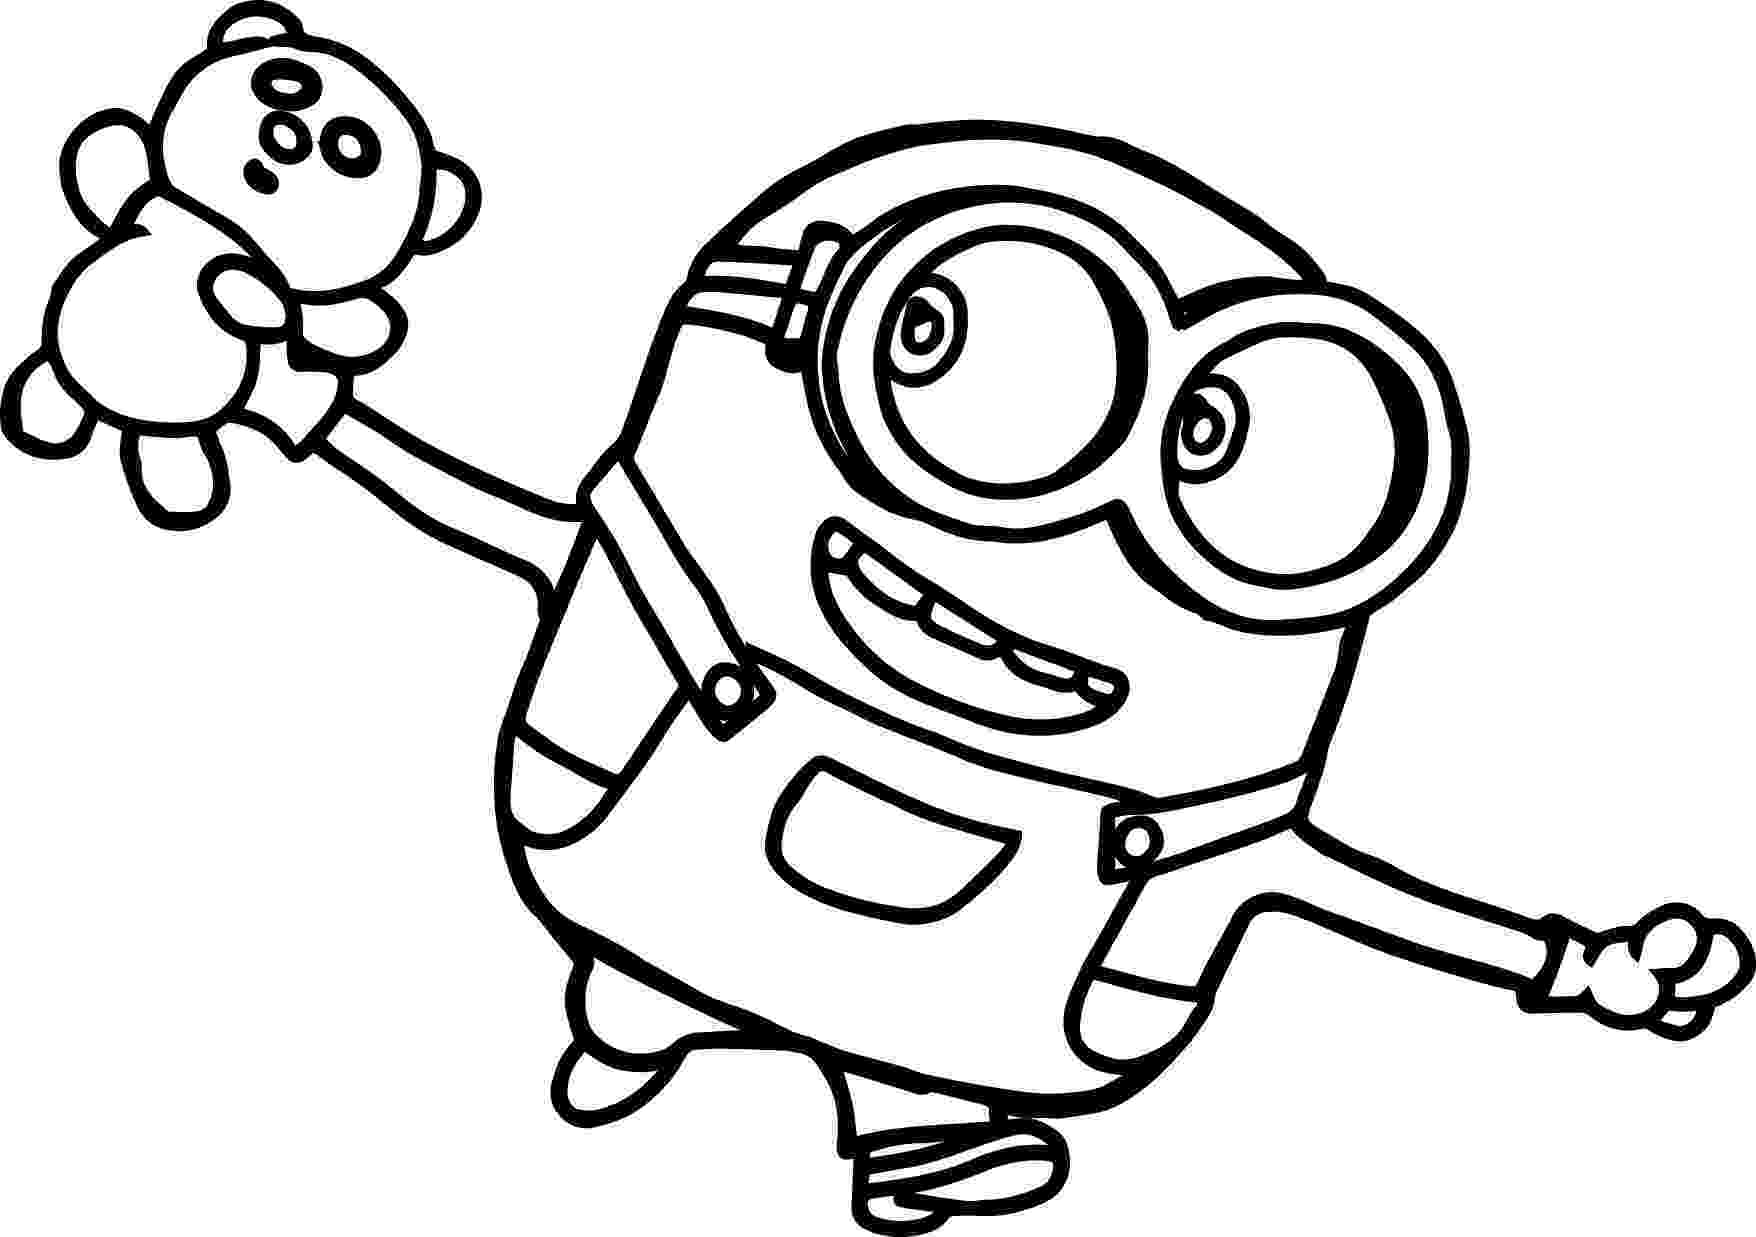 minions colouring pictures minion very cute coloring page minion coloring pages pictures minions colouring 